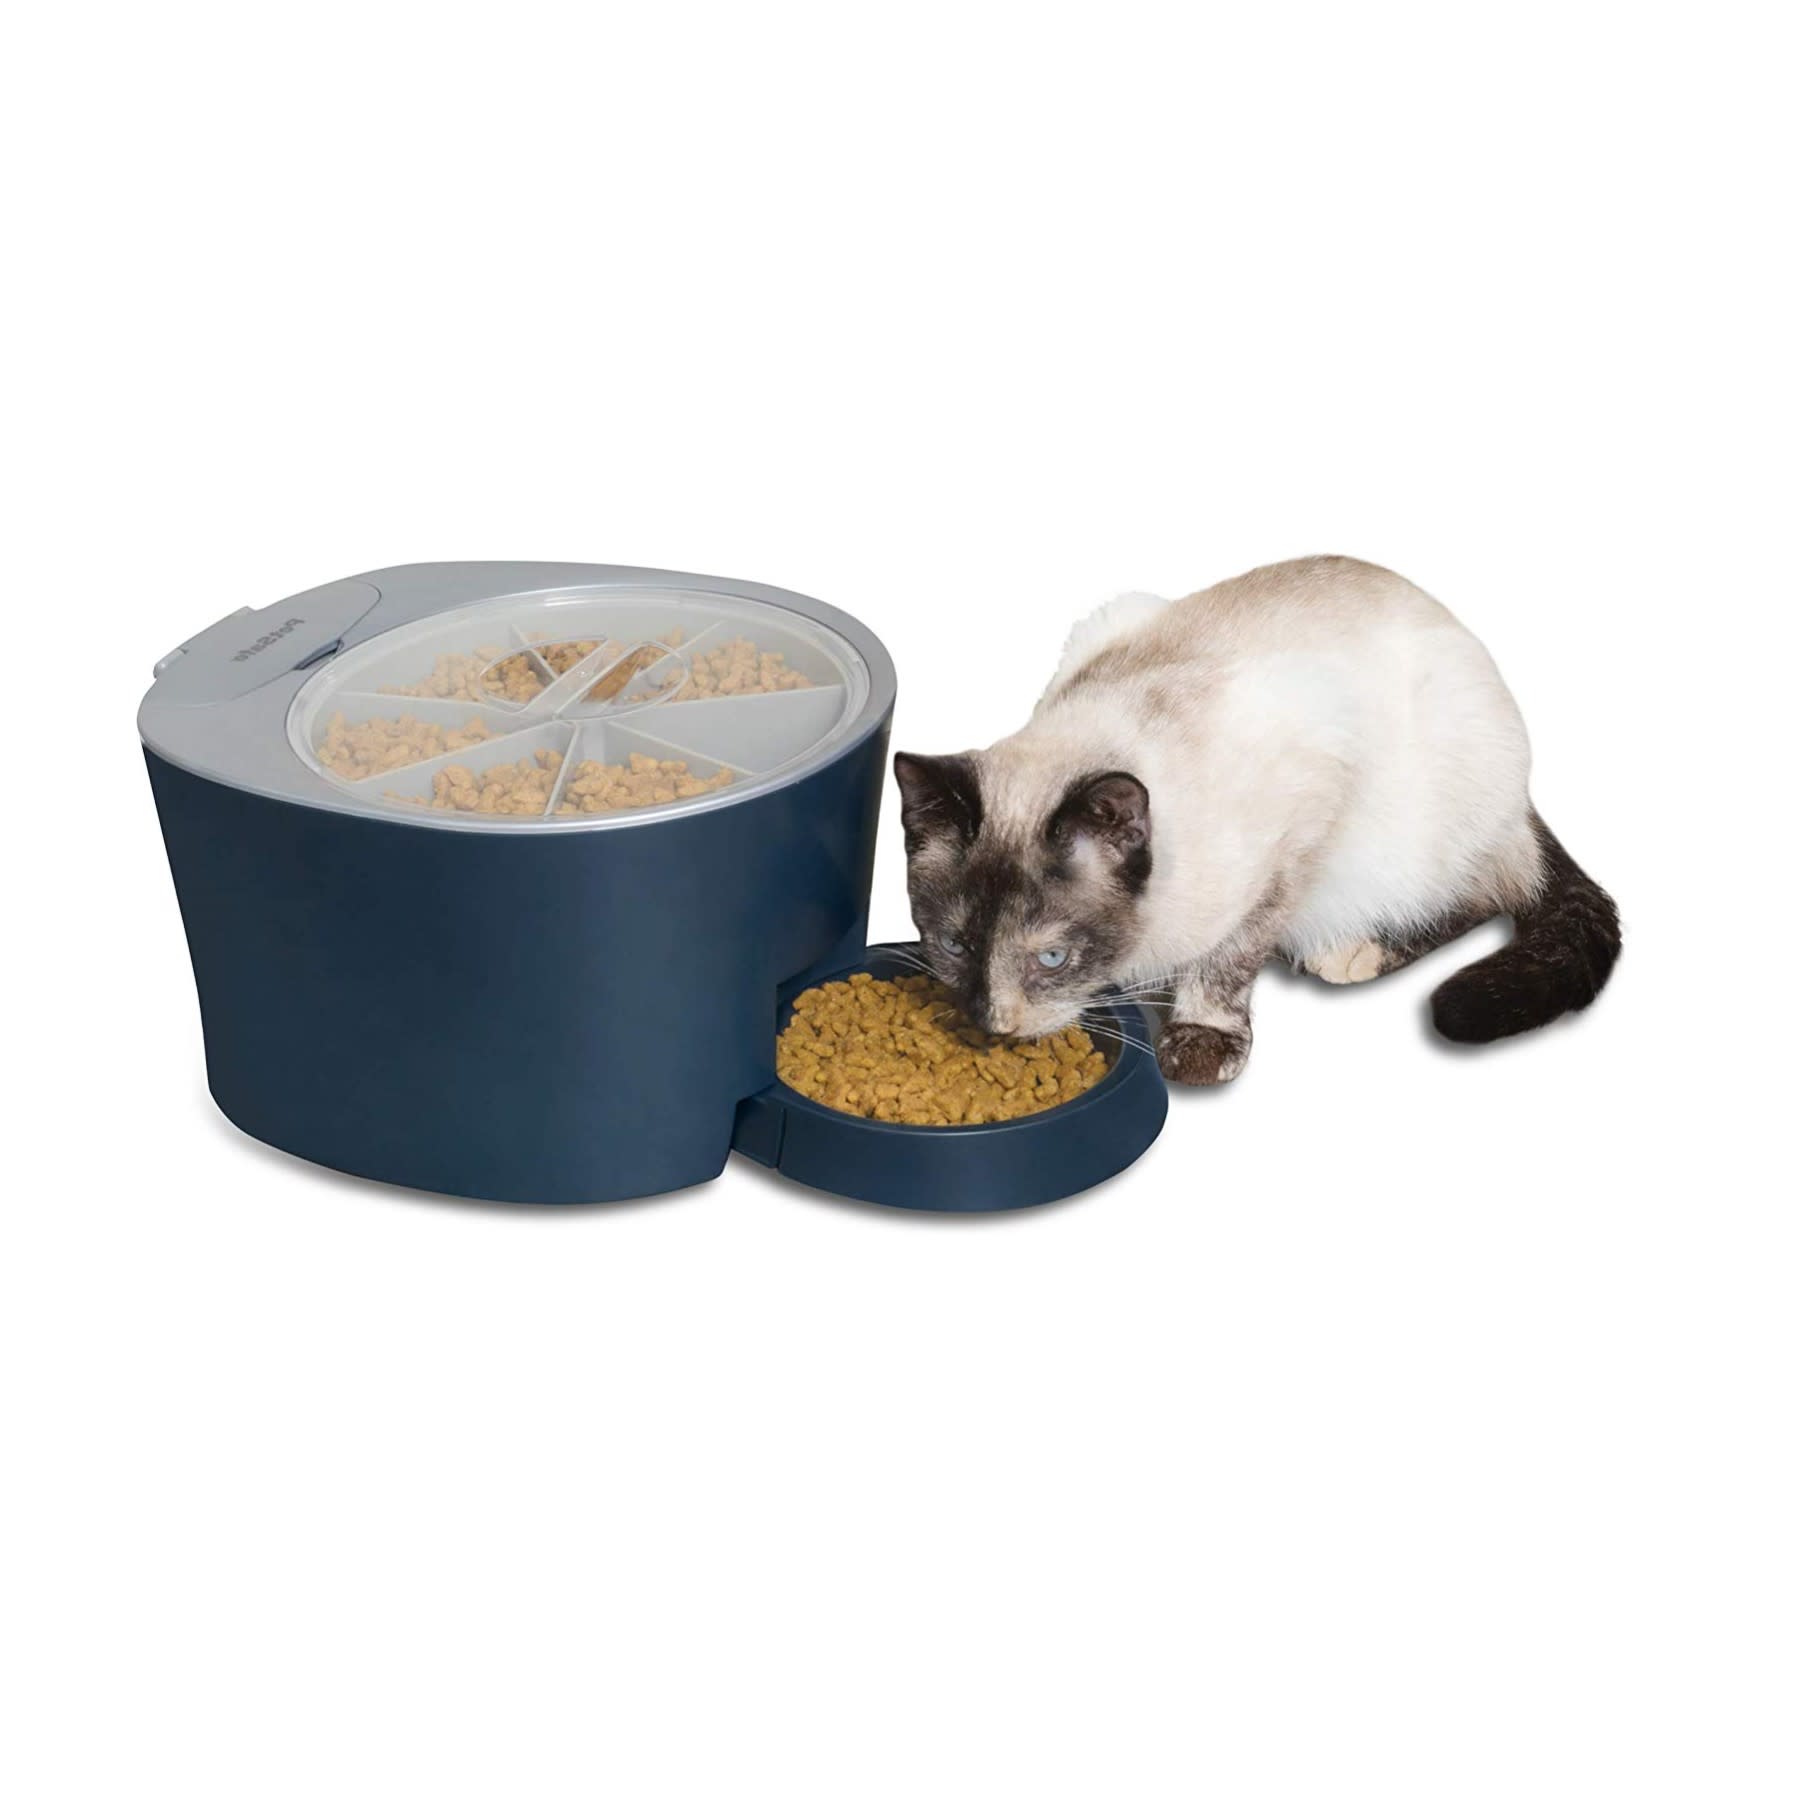 PetSafe 6 Meal Pet Feeder, Automatic Cat & Dog Feeder, 6 Cup Capacity - image 1 of 7